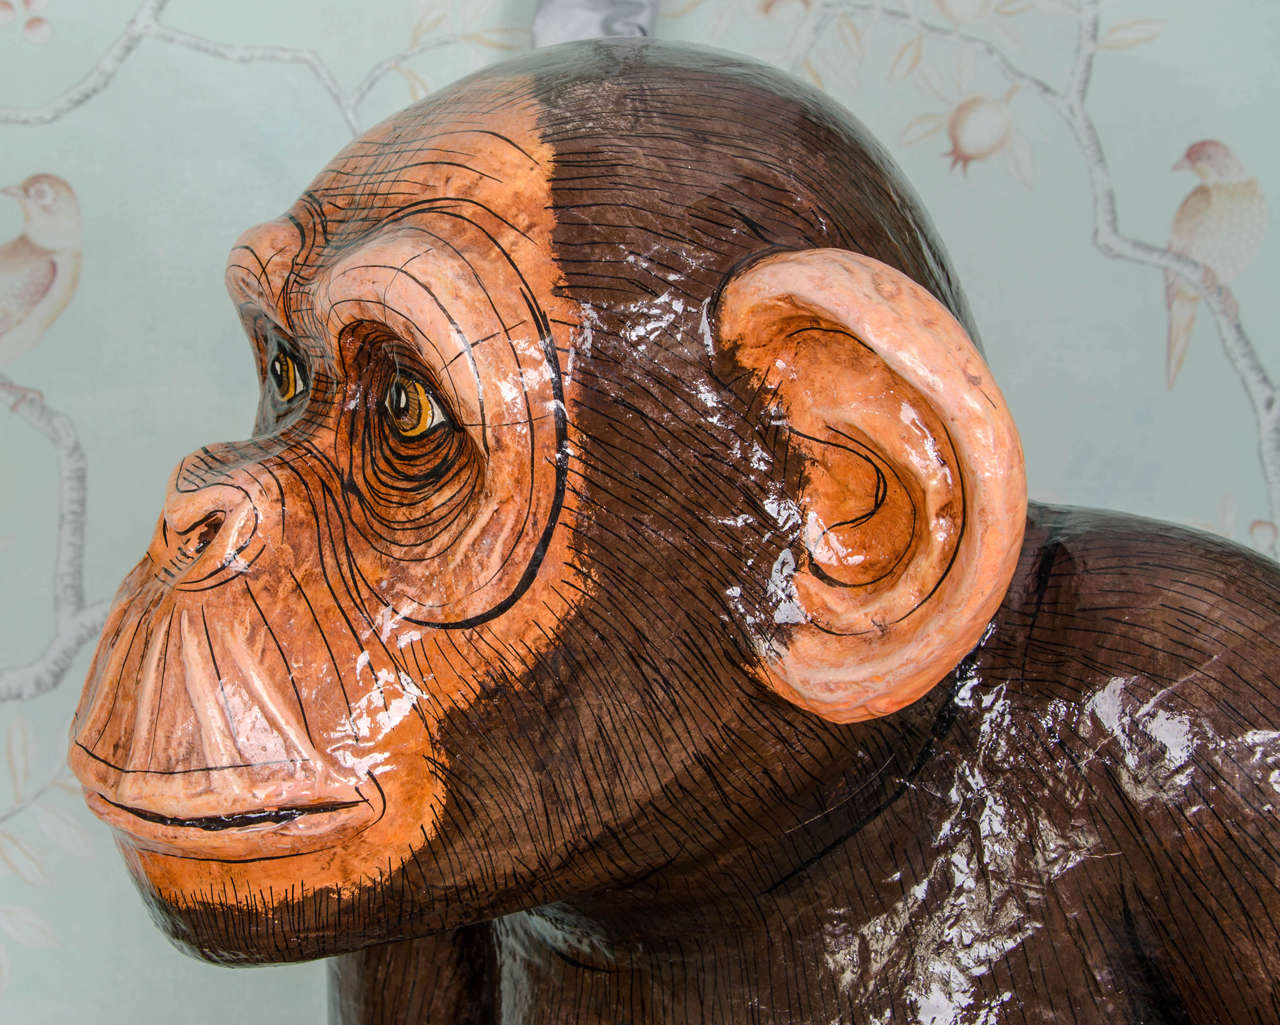 Mexican Lifesize Paper Mache Sculpture of a Seated Monkey by Sergio Bustamante